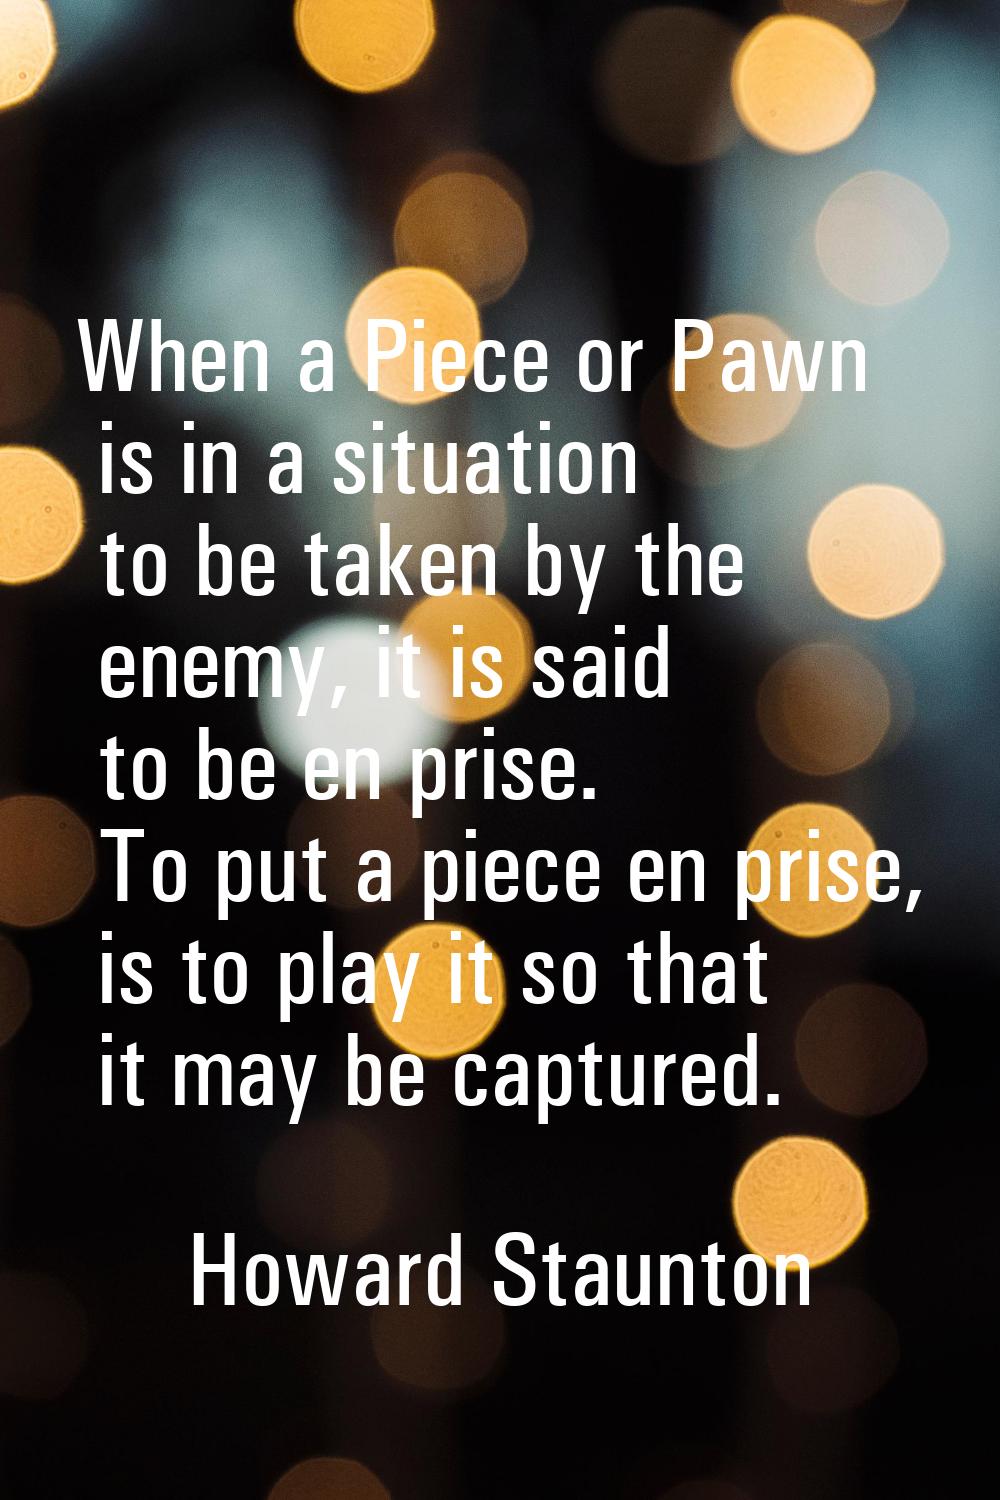 When a Piece or Pawn is in a situation to be taken by the enemy, it is said to be en prise. To put 